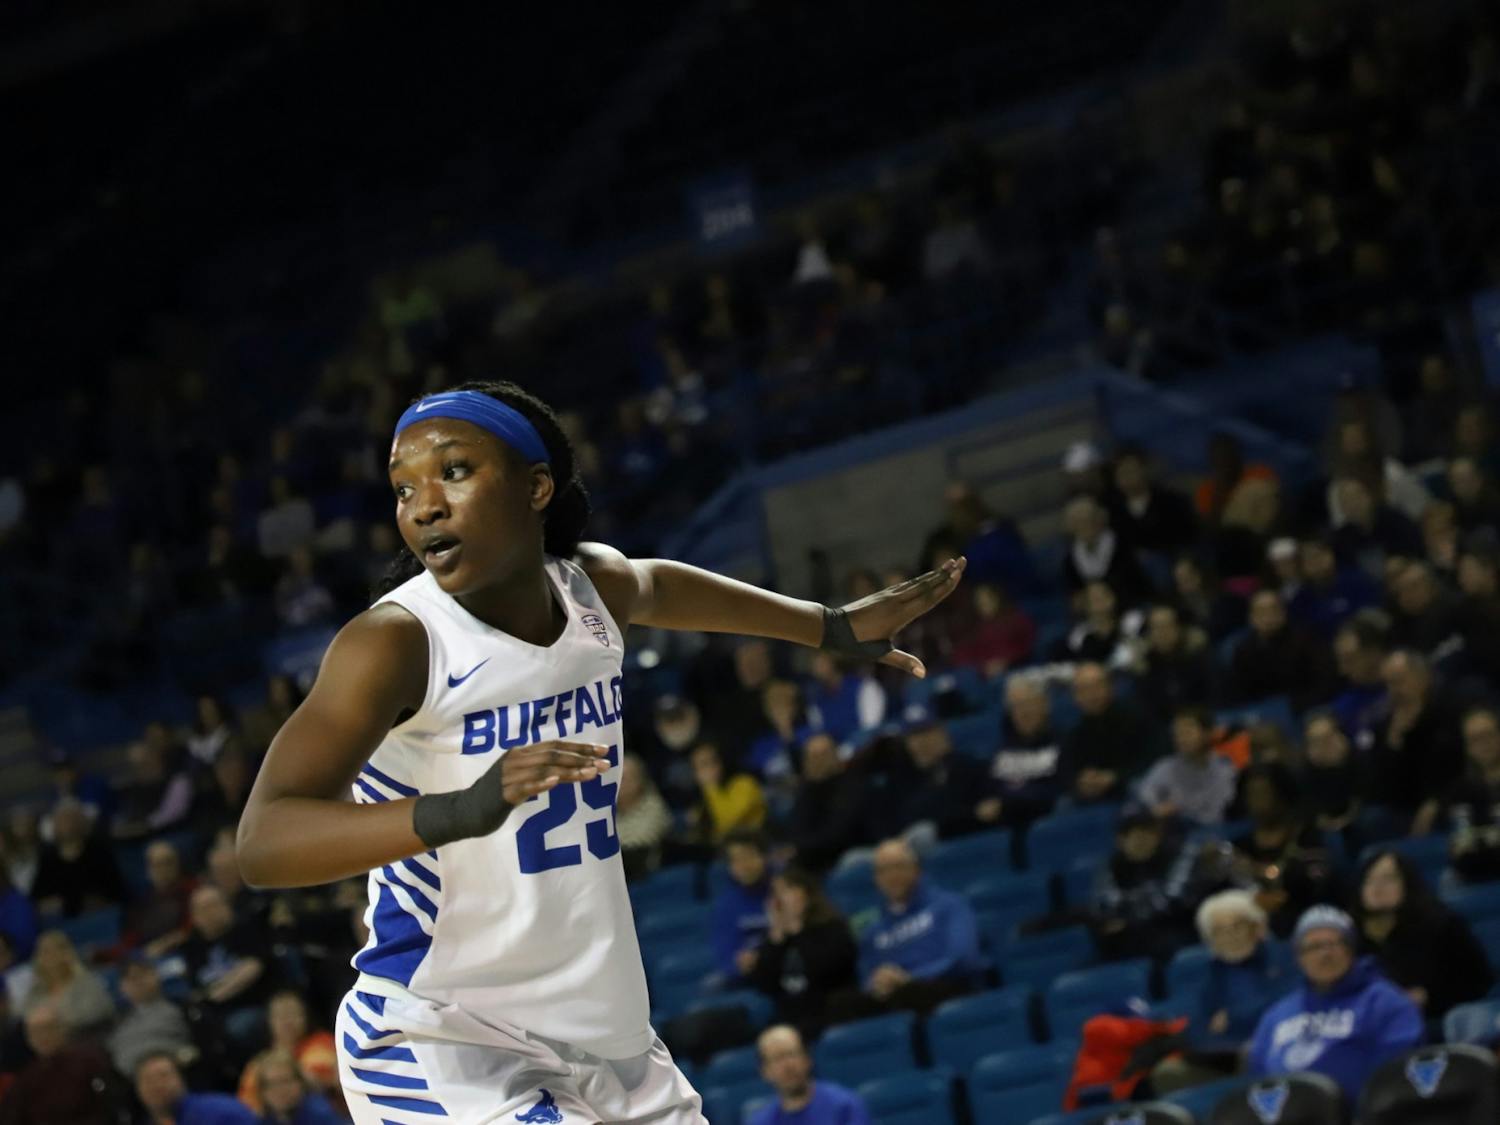 Sophomore forward Adebola Adeyeye scored 7 points and made 1 assist during the game against Miami(OH) on Wednesday.